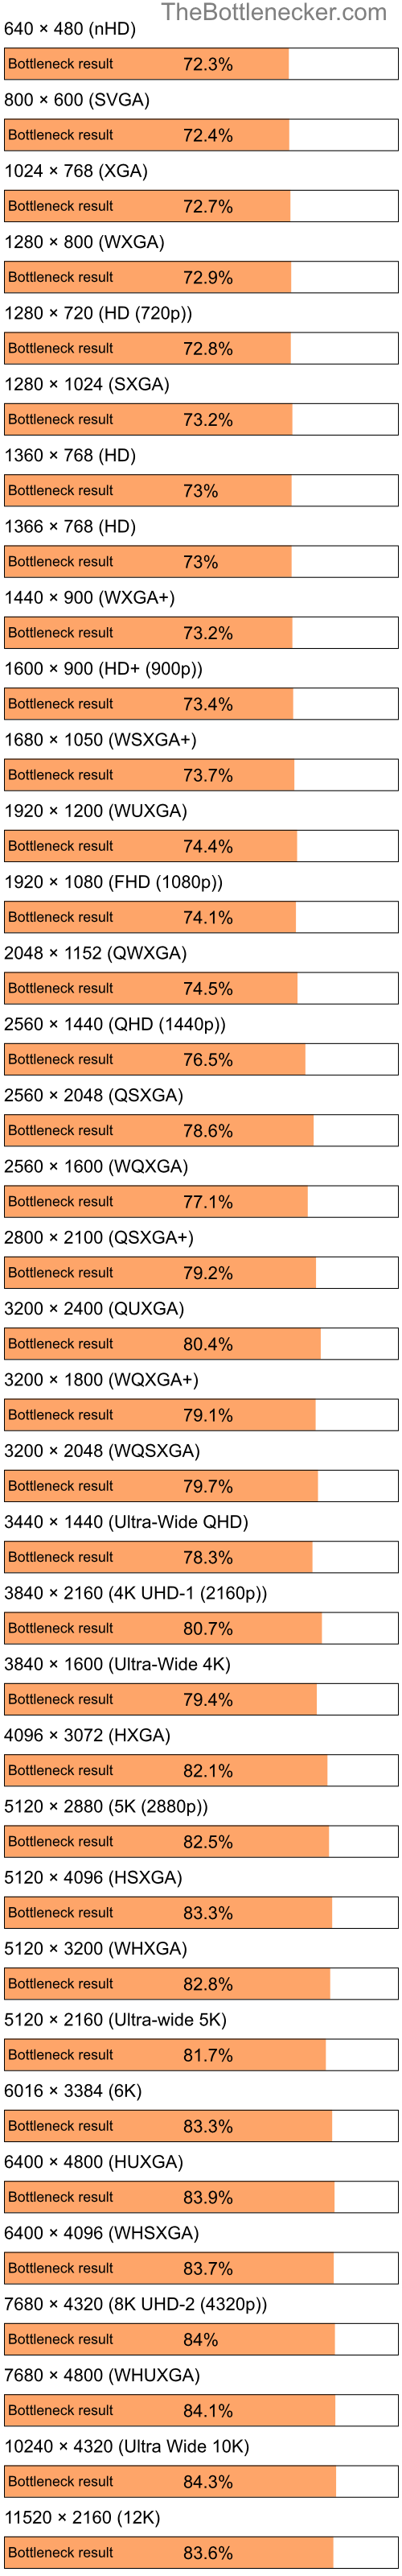 Bottleneck results by resolution for Intel Celeron and NVIDIA GeForce 8400 in Graphic Card Intense Tasks